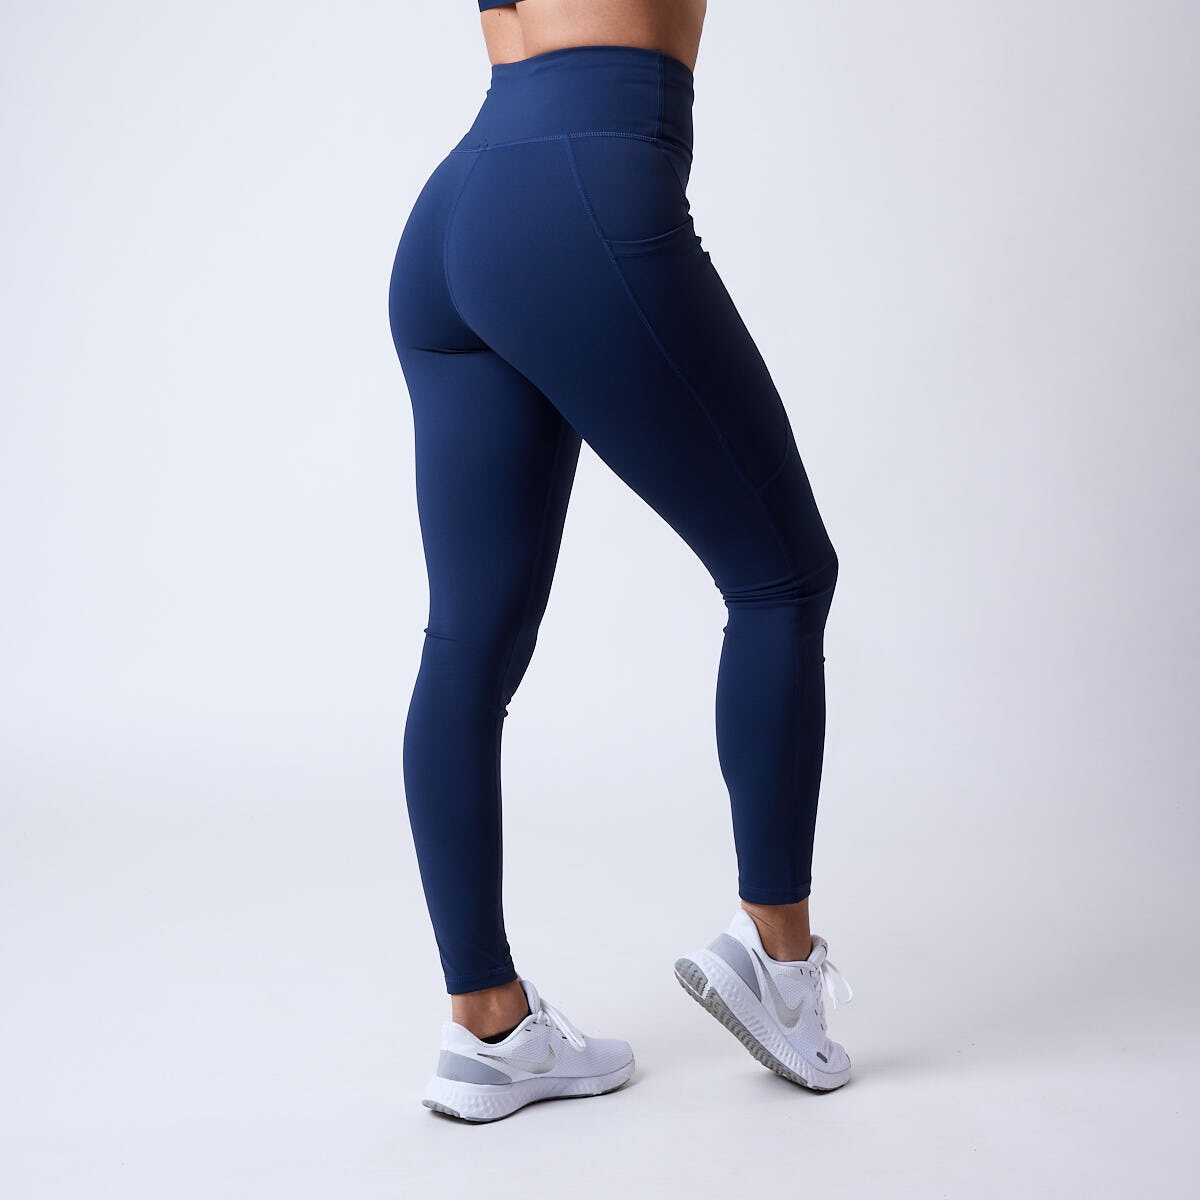 Charge ws tights Dark blue